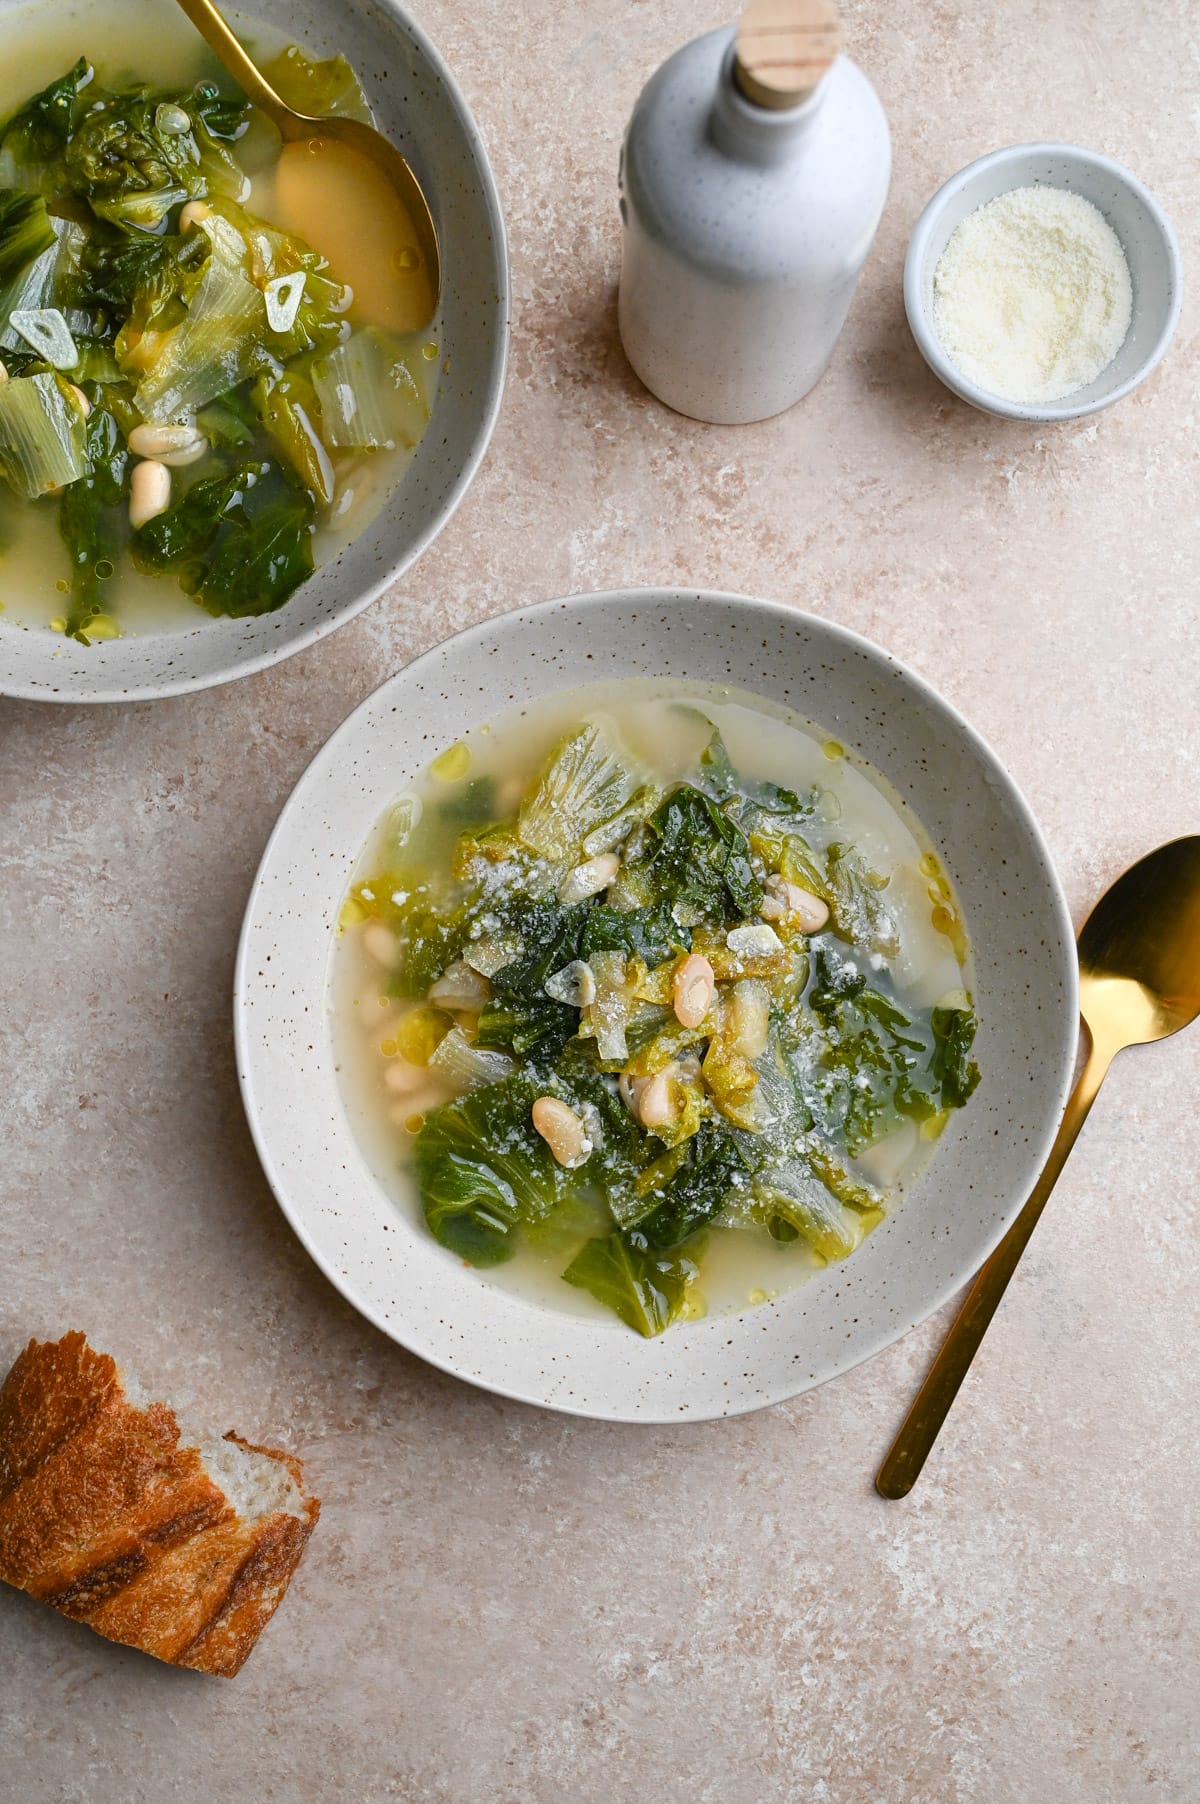 Overhead view of two bowls of Escarole and Beans surrounded by parmesan, a spoon and a piece of bread.